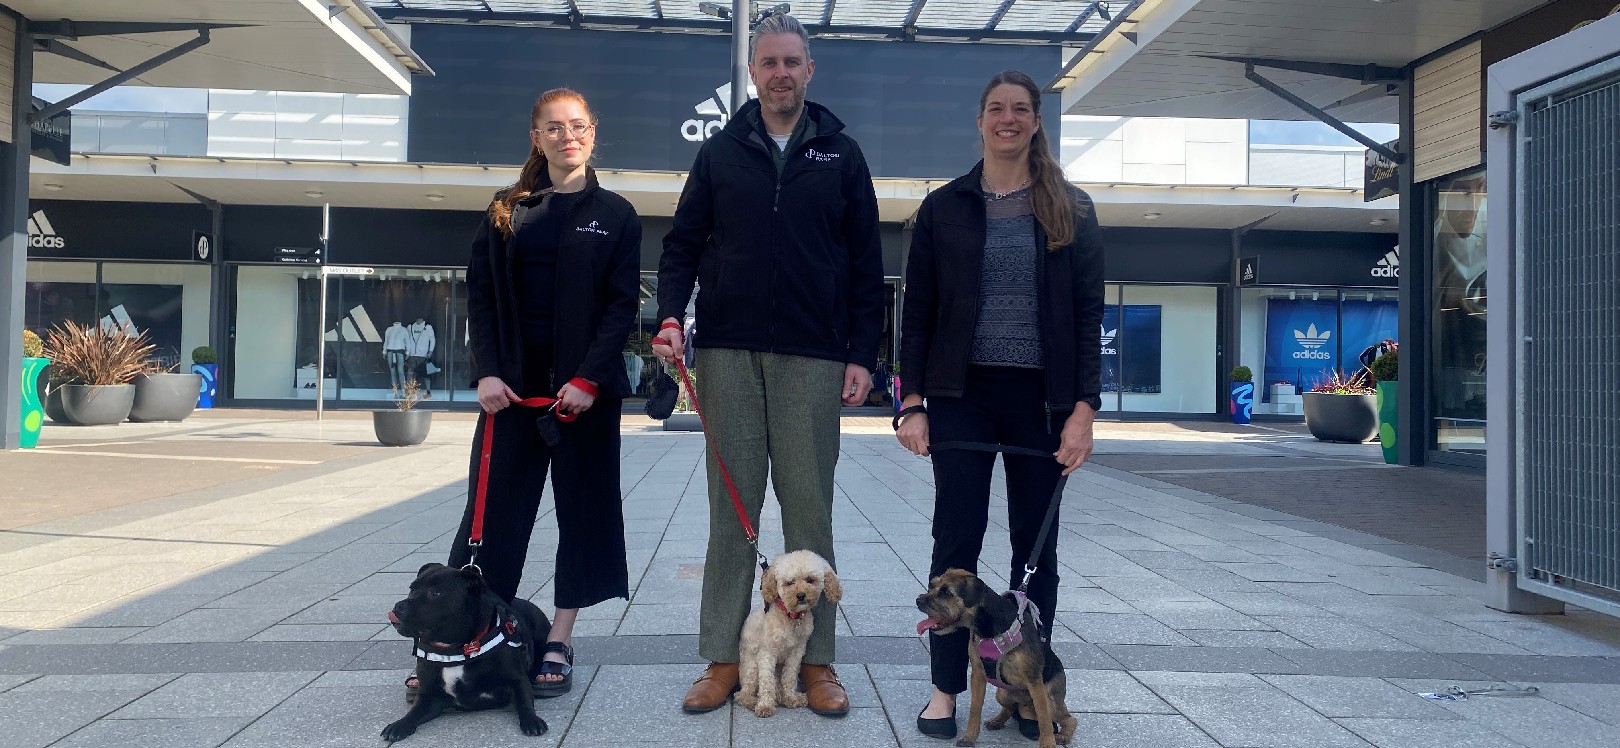 Digital Marketing Assistant Chelsea Pashley with Buzz the dog, Centre Manager Richard Kaye with Juno the dog and Operations Manager Jackie Johnson with Rosie the dog at Dalton Park